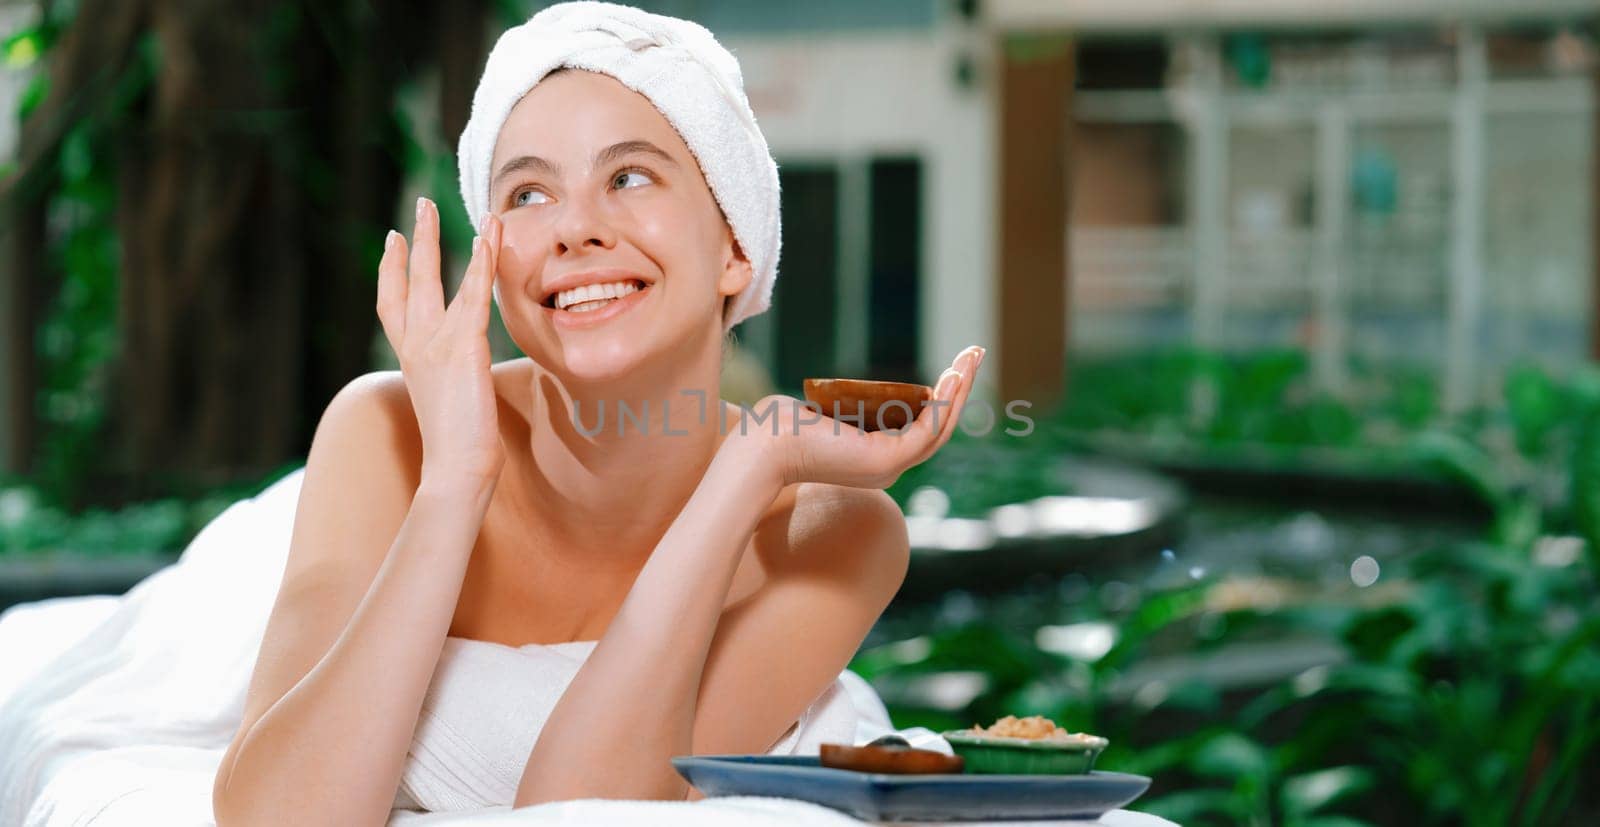 Beautiful caucasian women in white towel smells herbal homemade facial mask while lie on spa bed surrounded by outdoor natural environment. Relaxing and chilling concept. Tranquility.